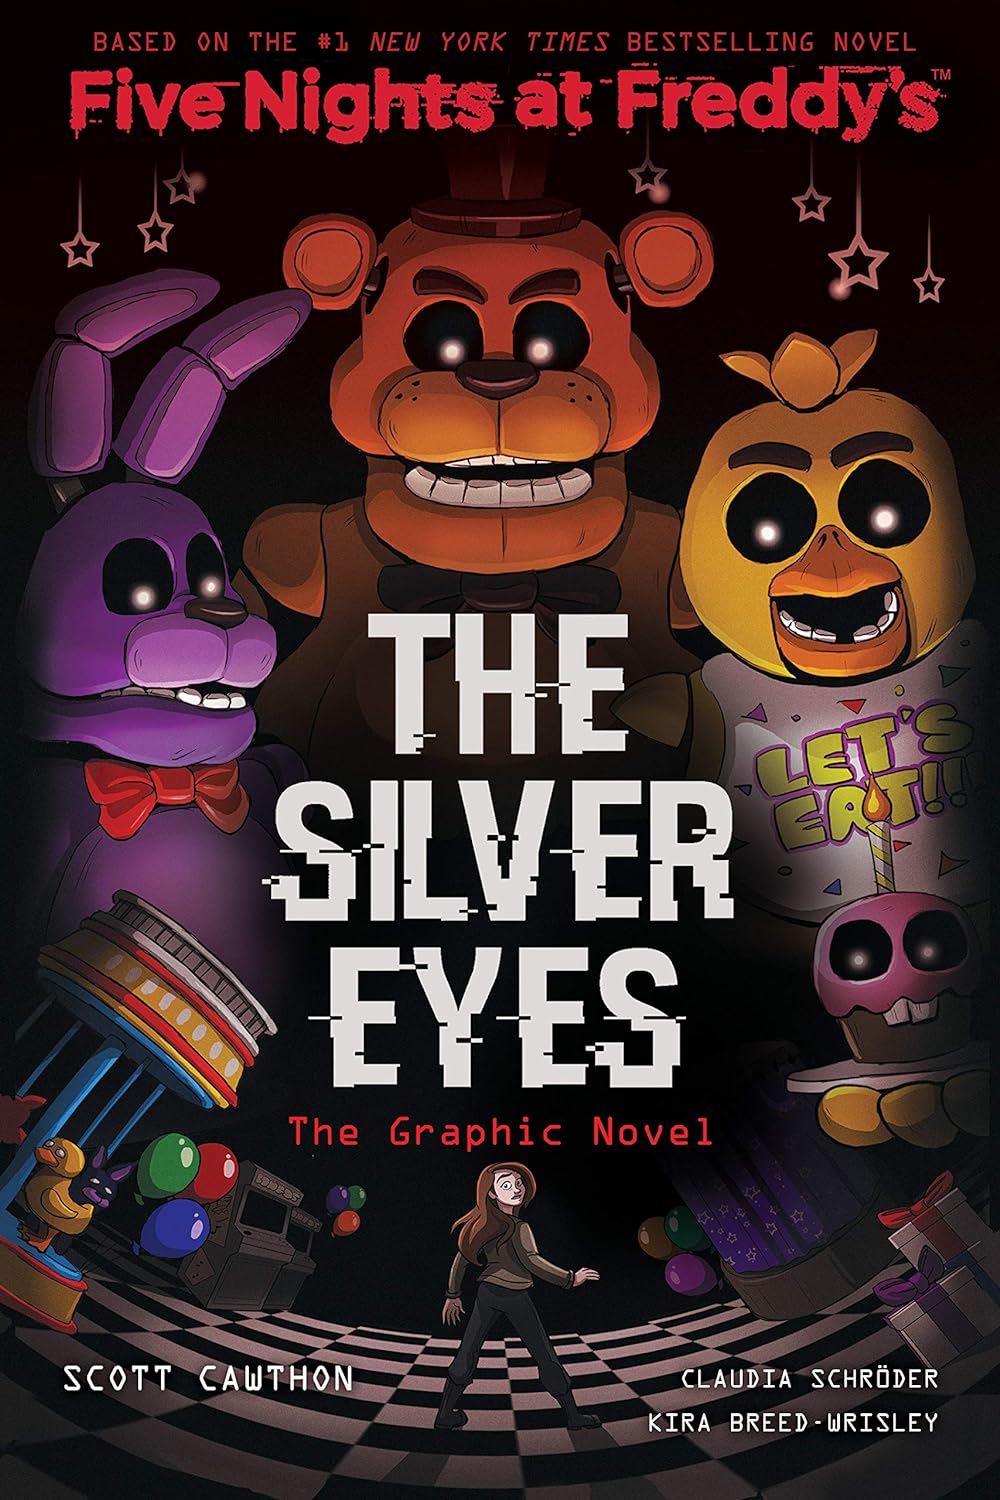 FIVE NIGHTS AT FREDDY'S - THE SILVER EYES VOL 1